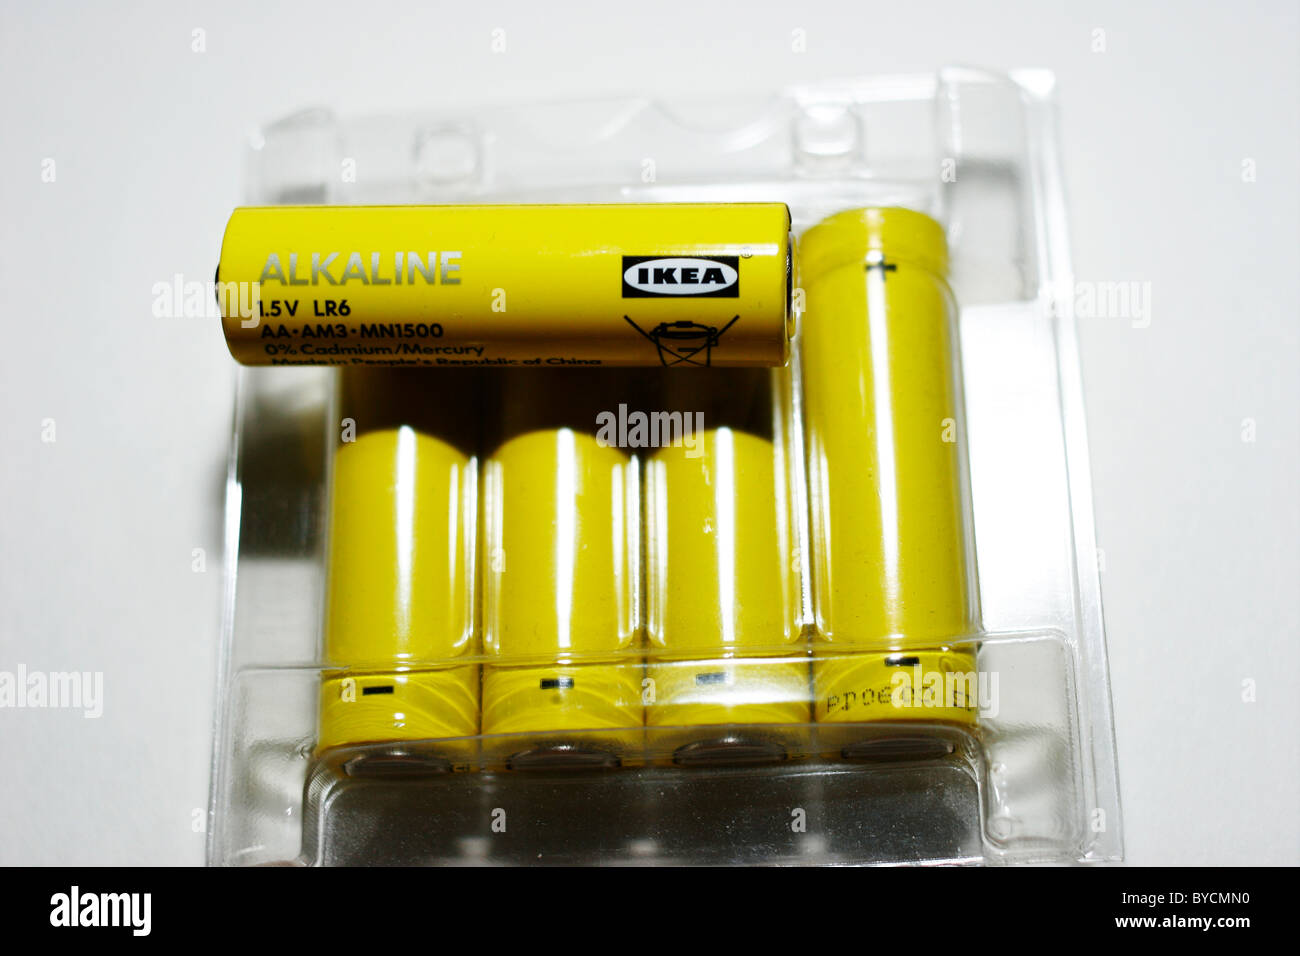 Ikea battery High Resolution Stock Photography and Images - Alamy